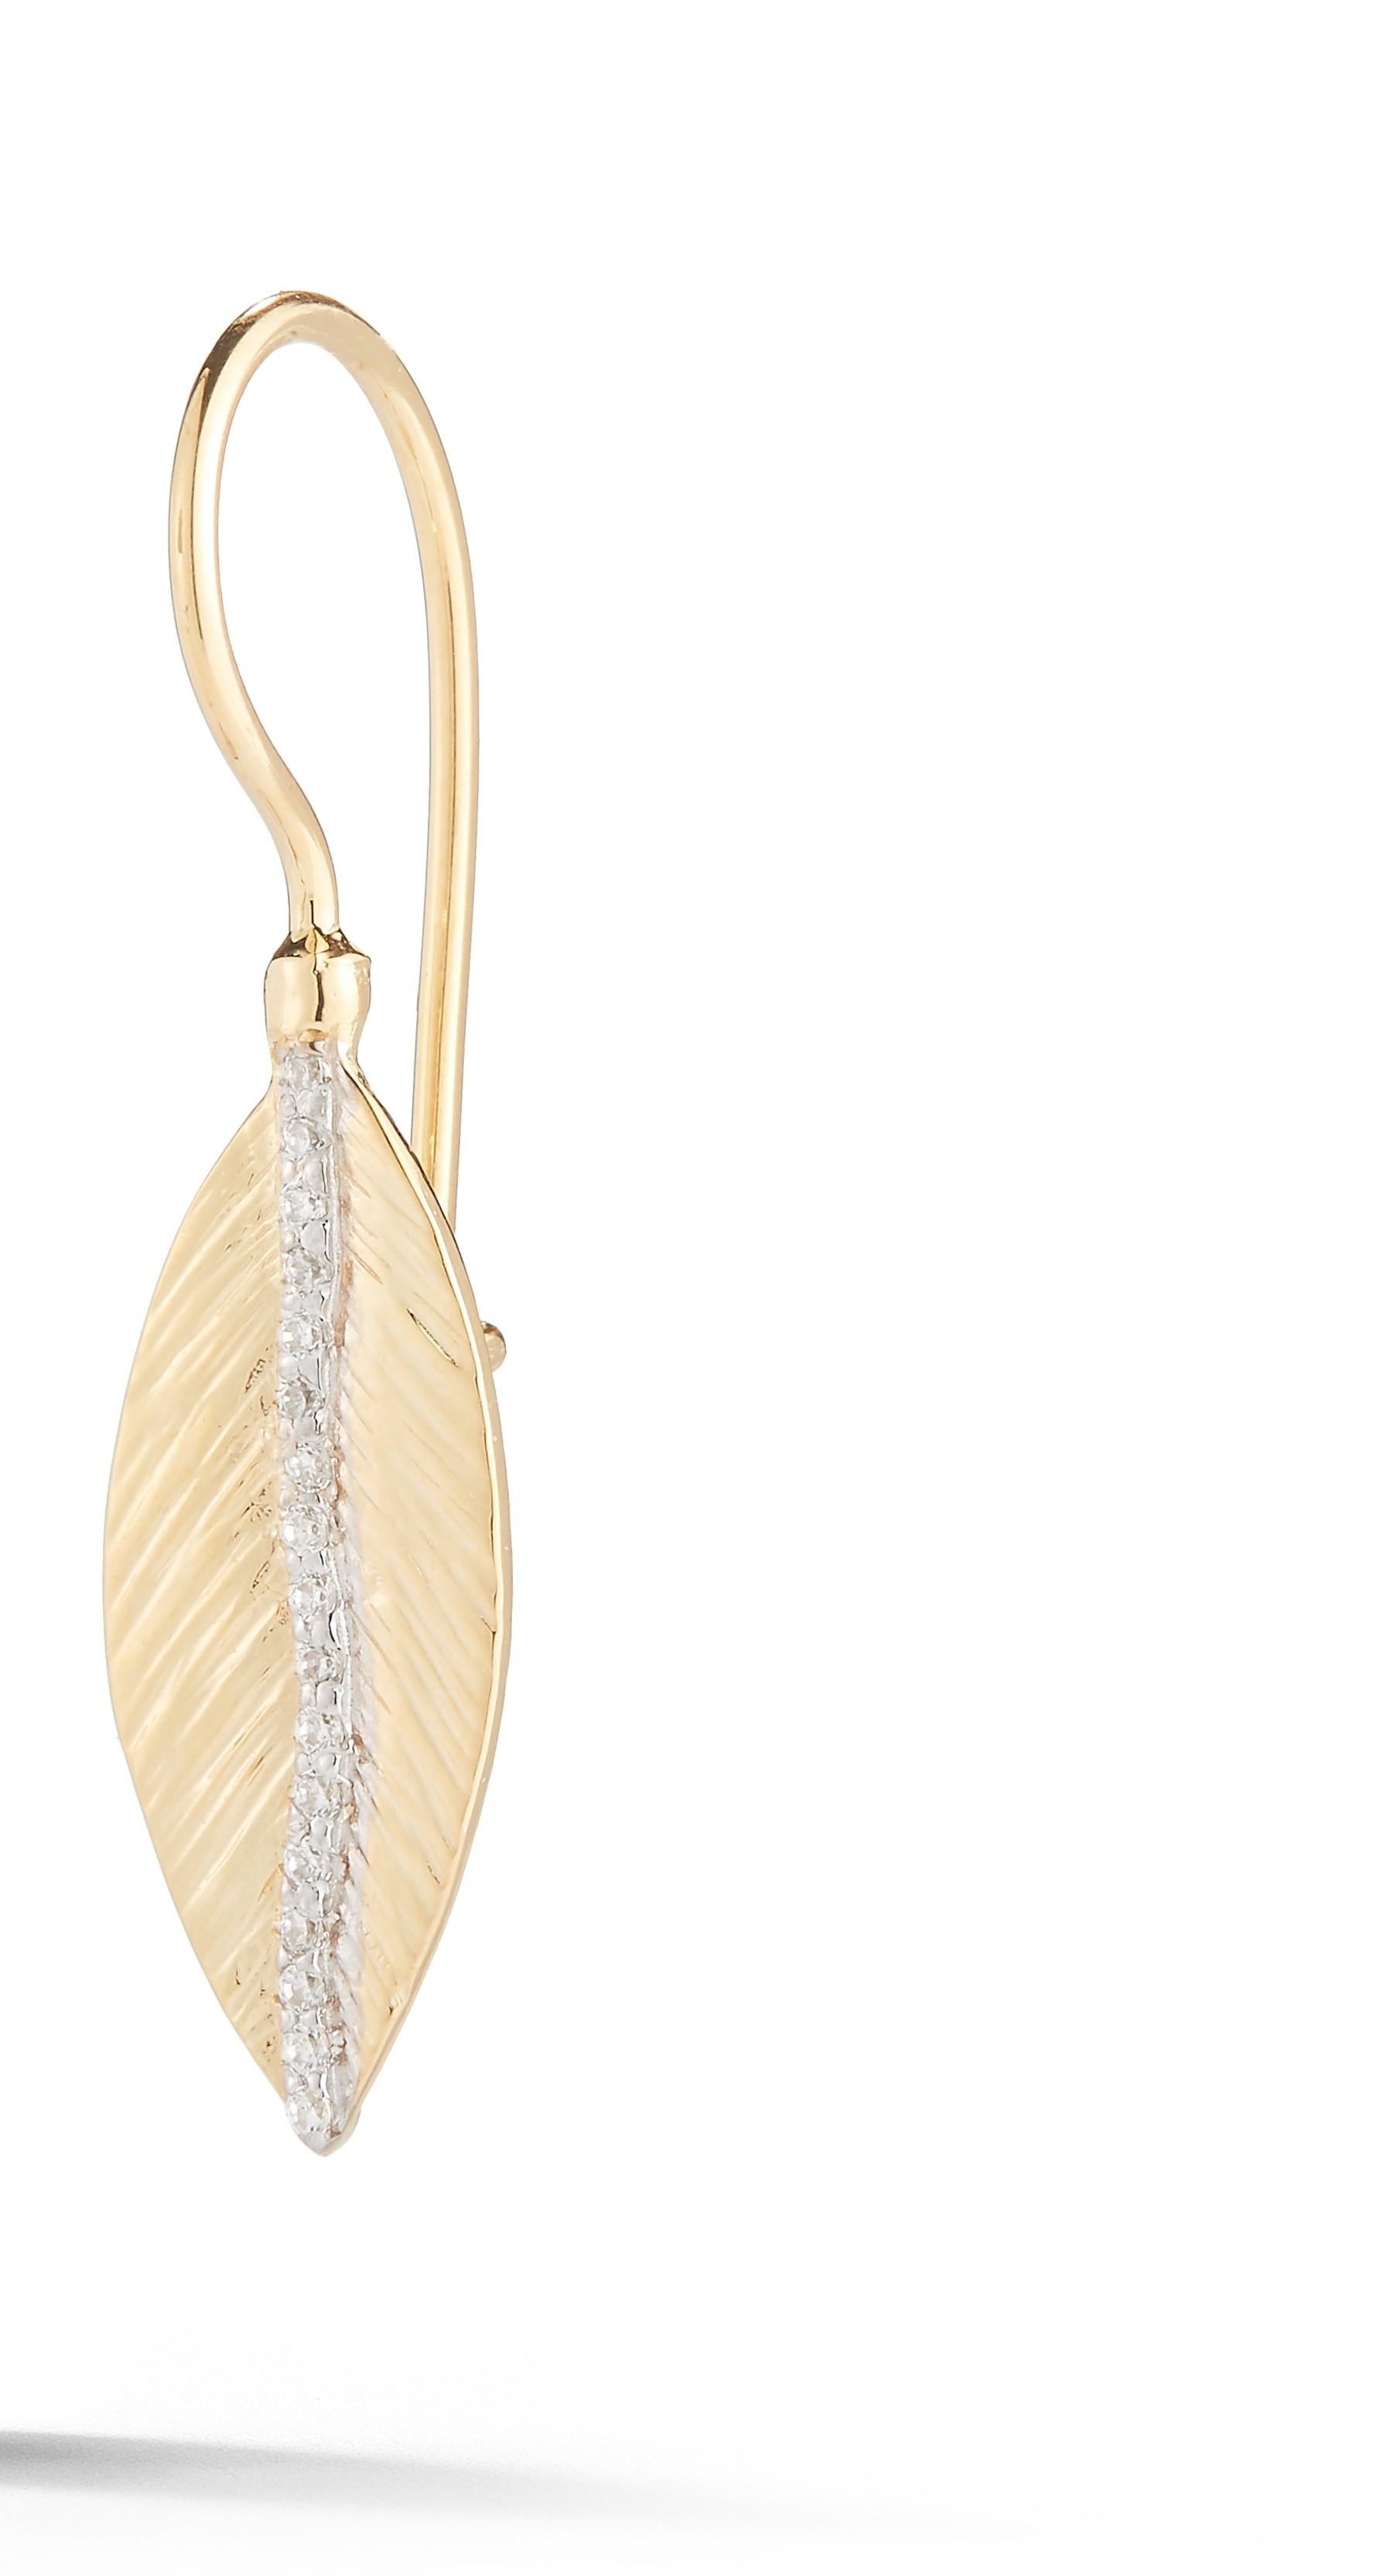 14 Karat Yellow Gold Hand-Crafted Polish-Finished Drop Feathr Earrings, Accented with 0.17 Carats of Pave Set Diamond Veins and French-Hook Wire Closures.
